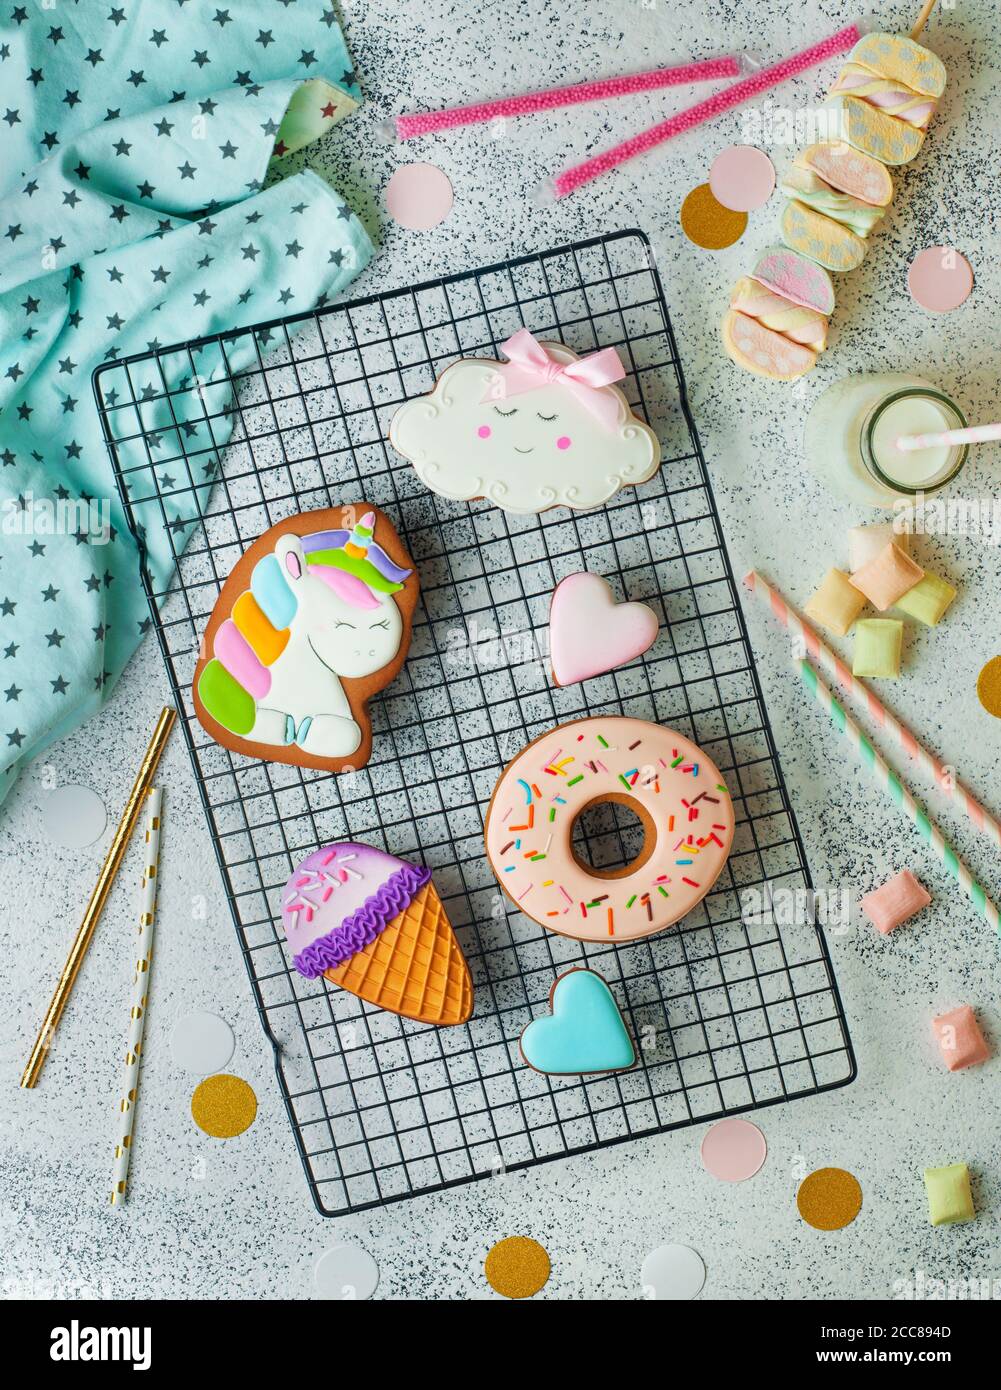 Funny ice cream cone, donut and cloud cookies gingerbread on lattice on party background Stock Photo